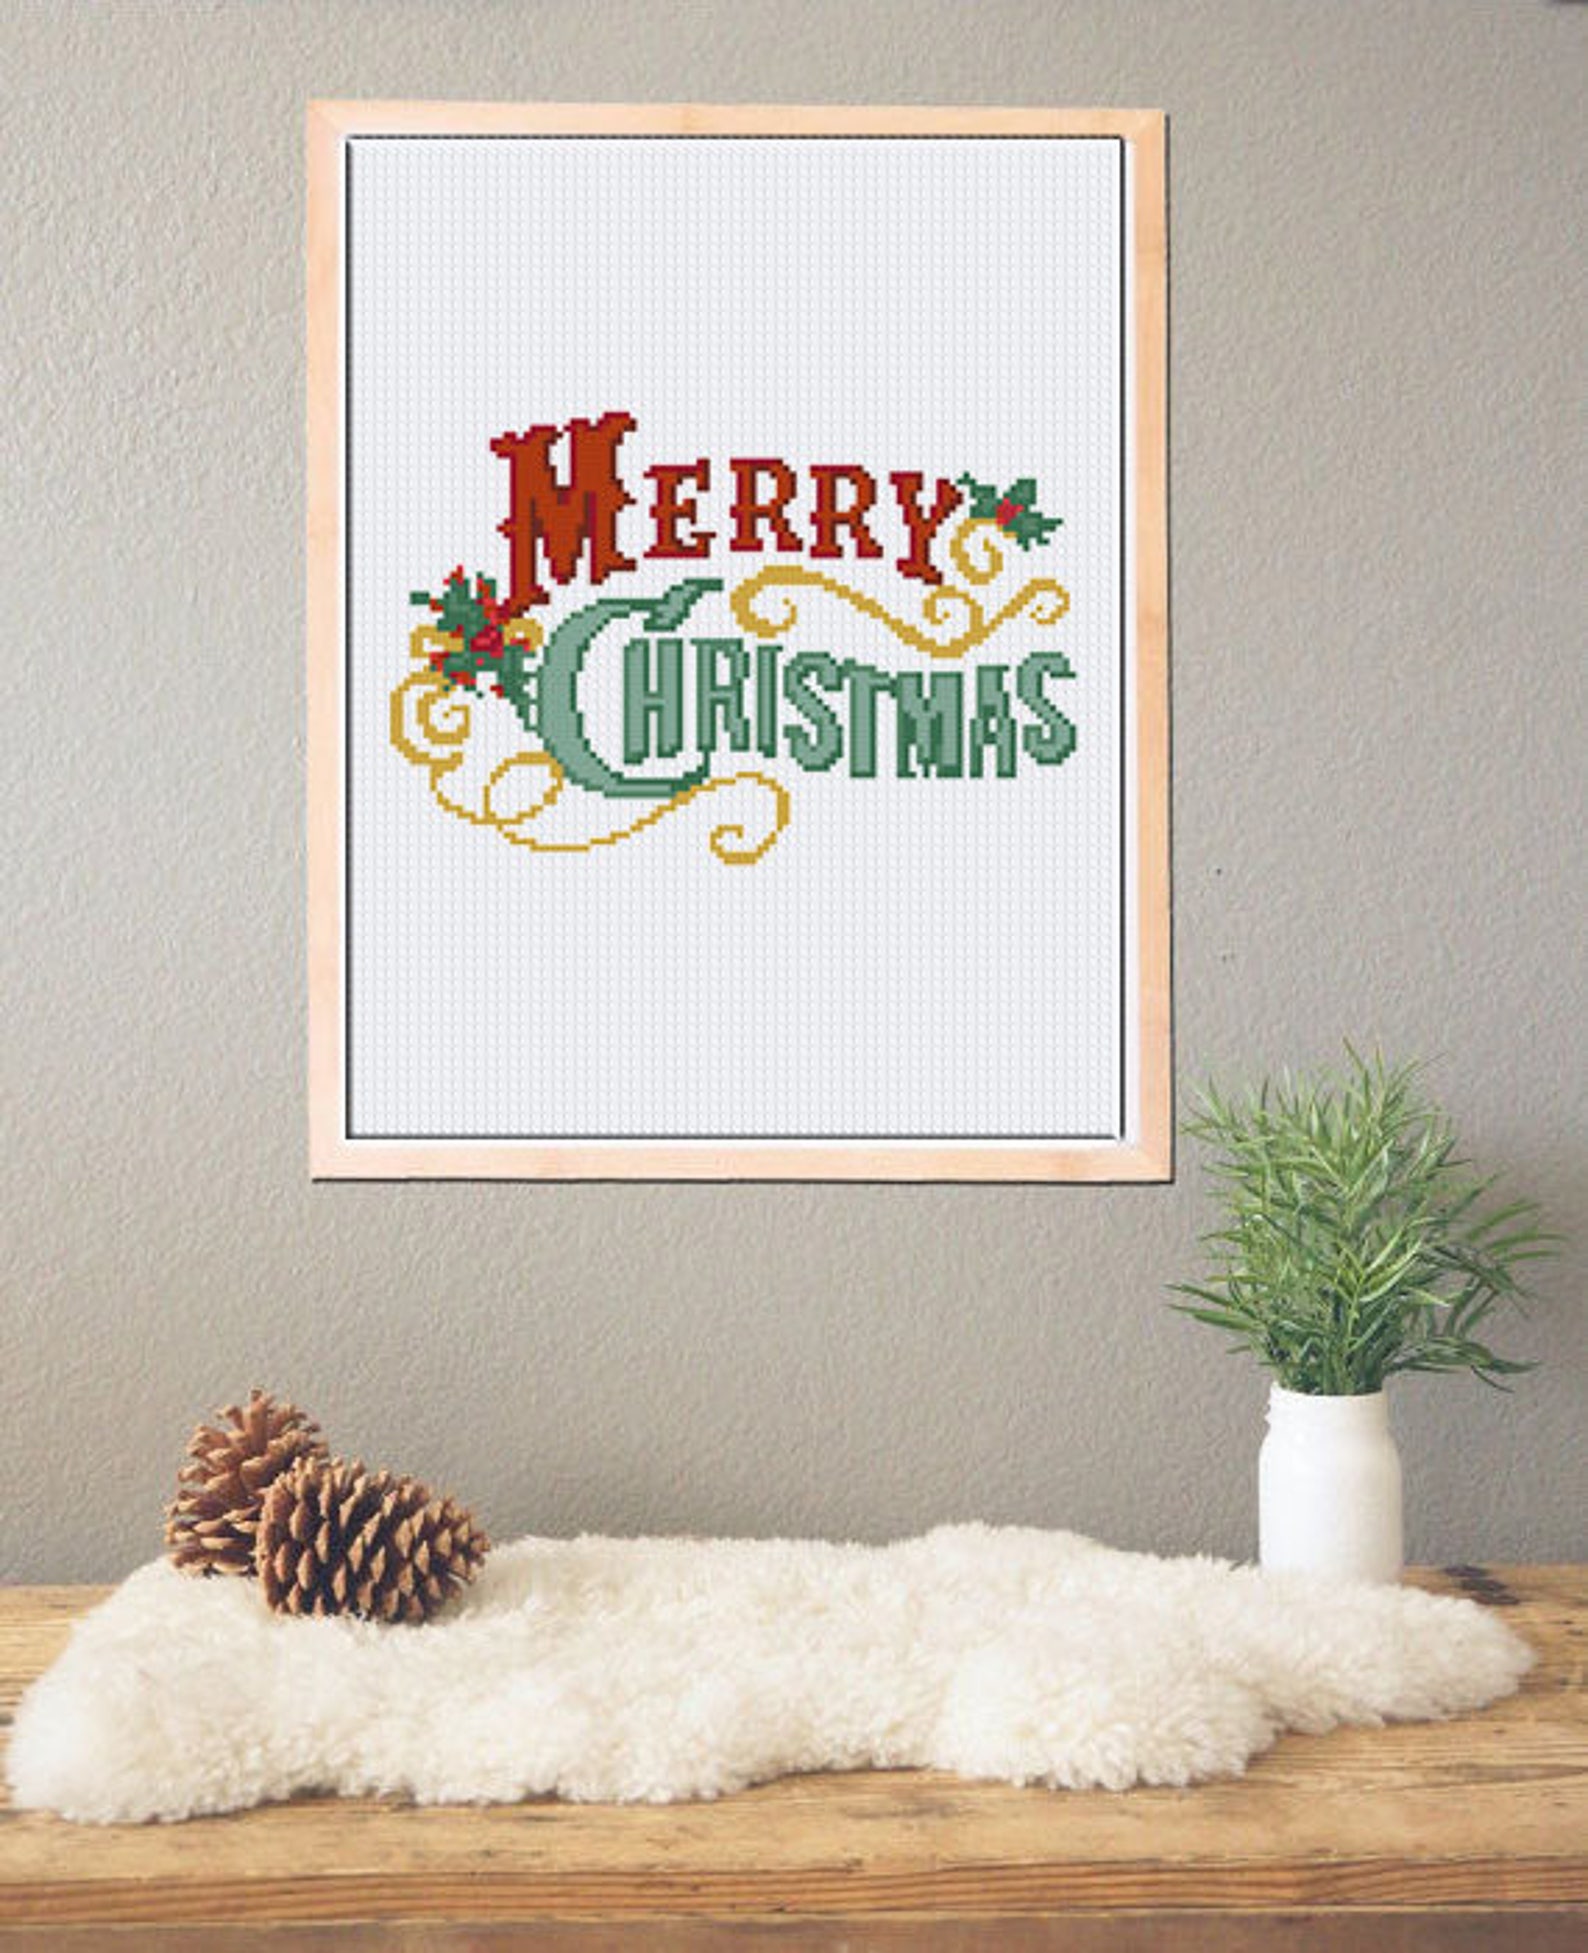 Vintage Christmas cross stitch pattern for Instant download. | Etsy